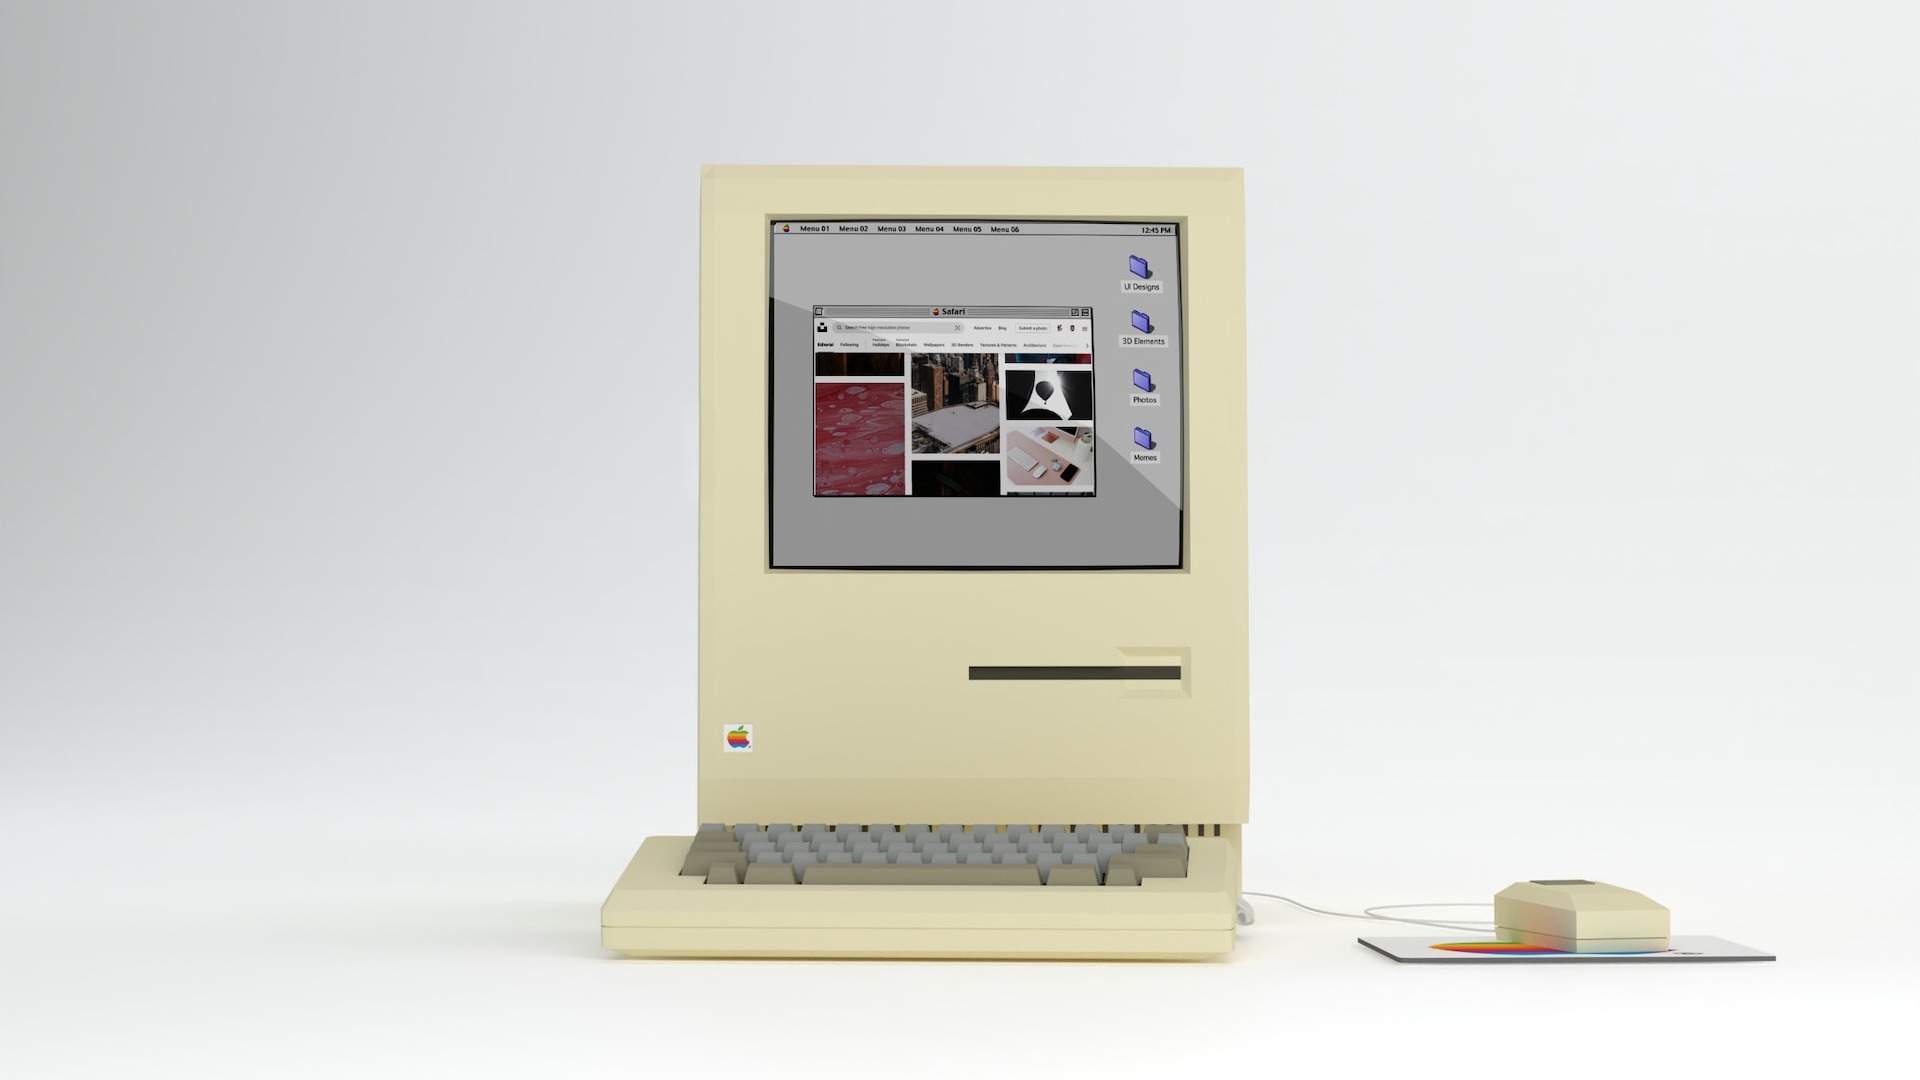 Oldschool Macintosh personal computer using the old internet system and interface.